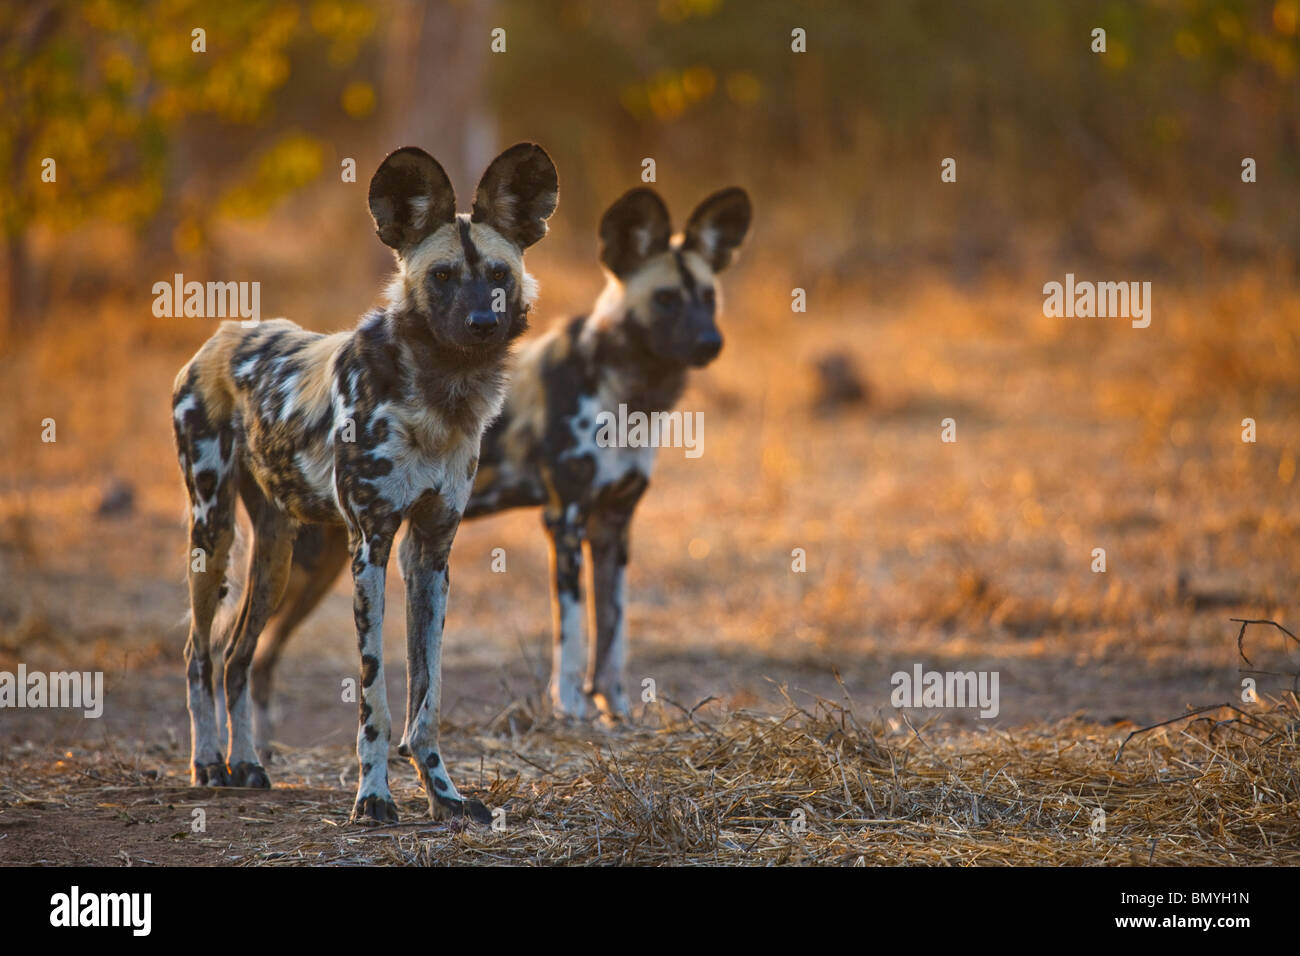 African Wild Dog (Lycaon pictus). Two individuals standing. Stock Photo